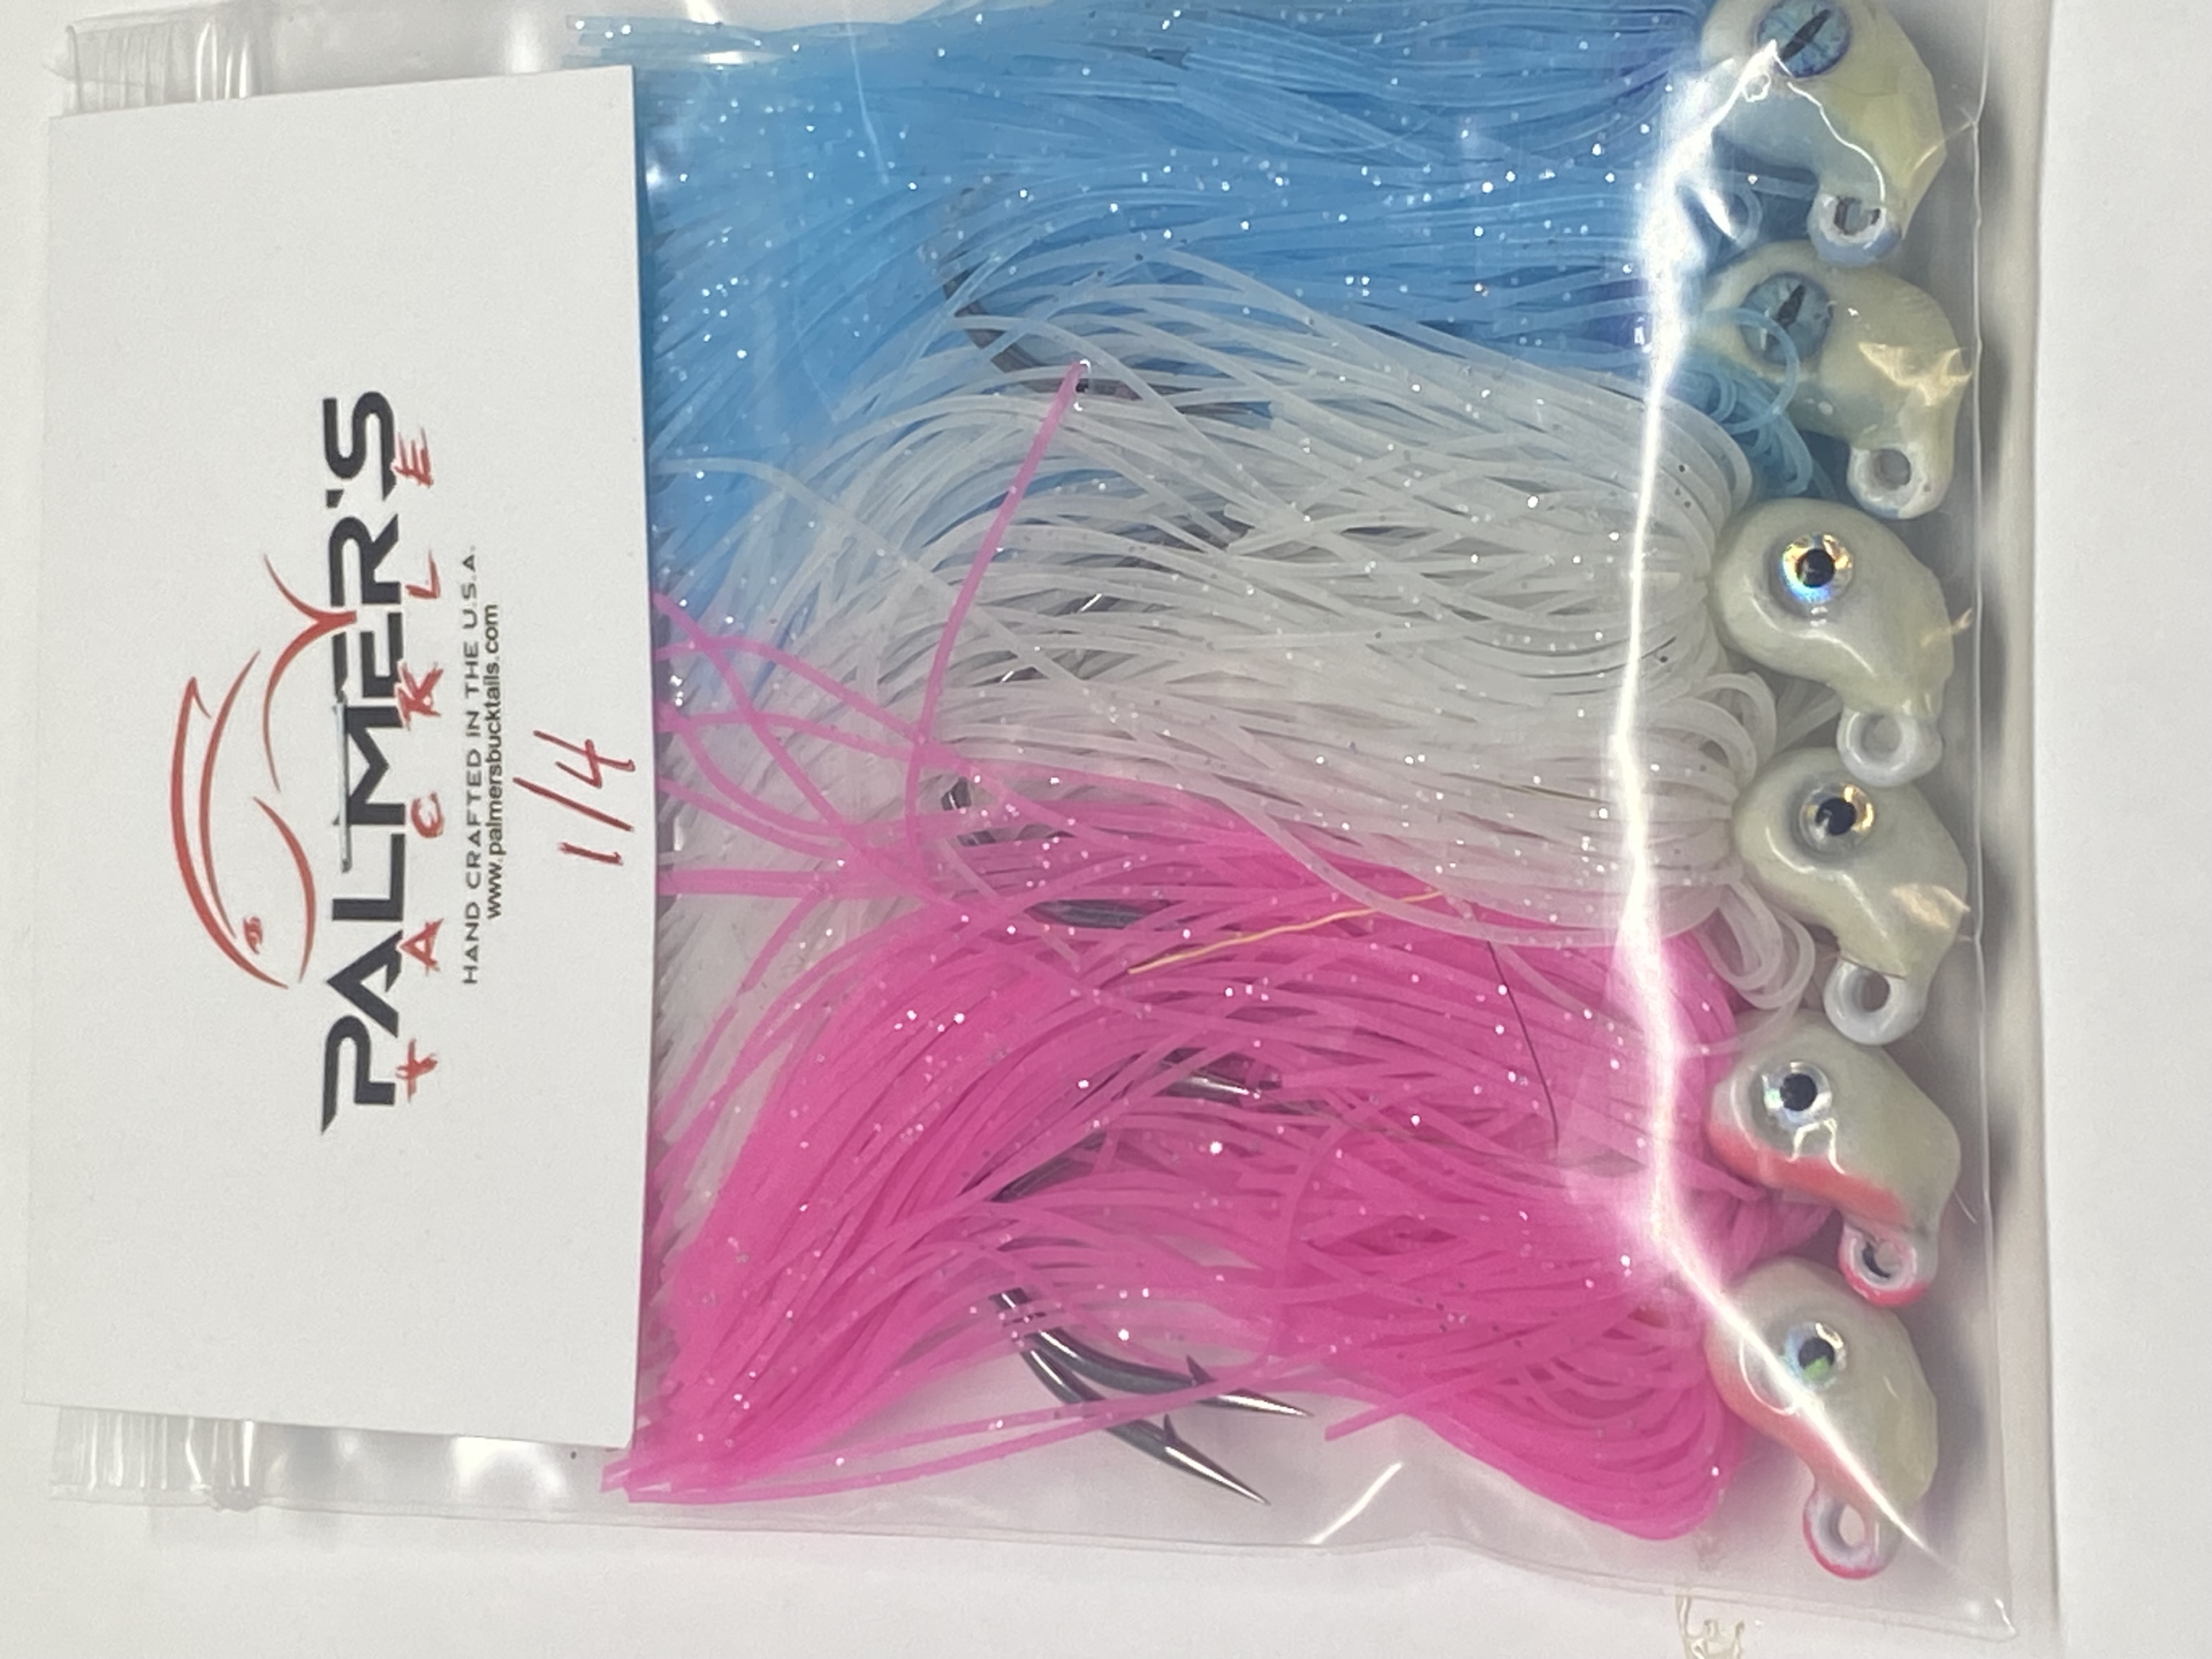 Palmers Bucktails, Palmers Tackle Co., High Quality Saltwater